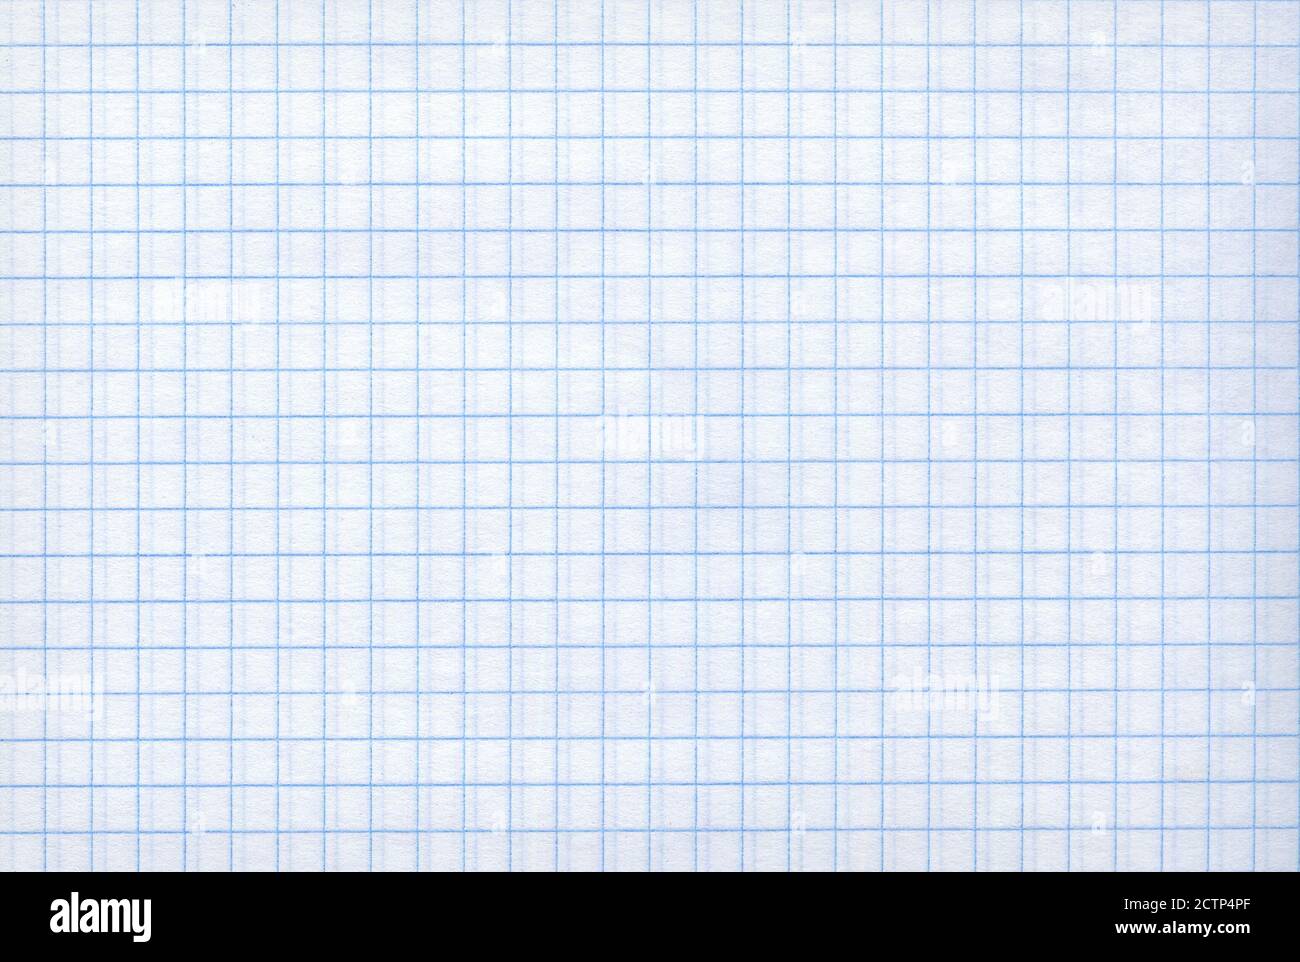 Detailed blank math paper pattern texture as background. Stock Photo